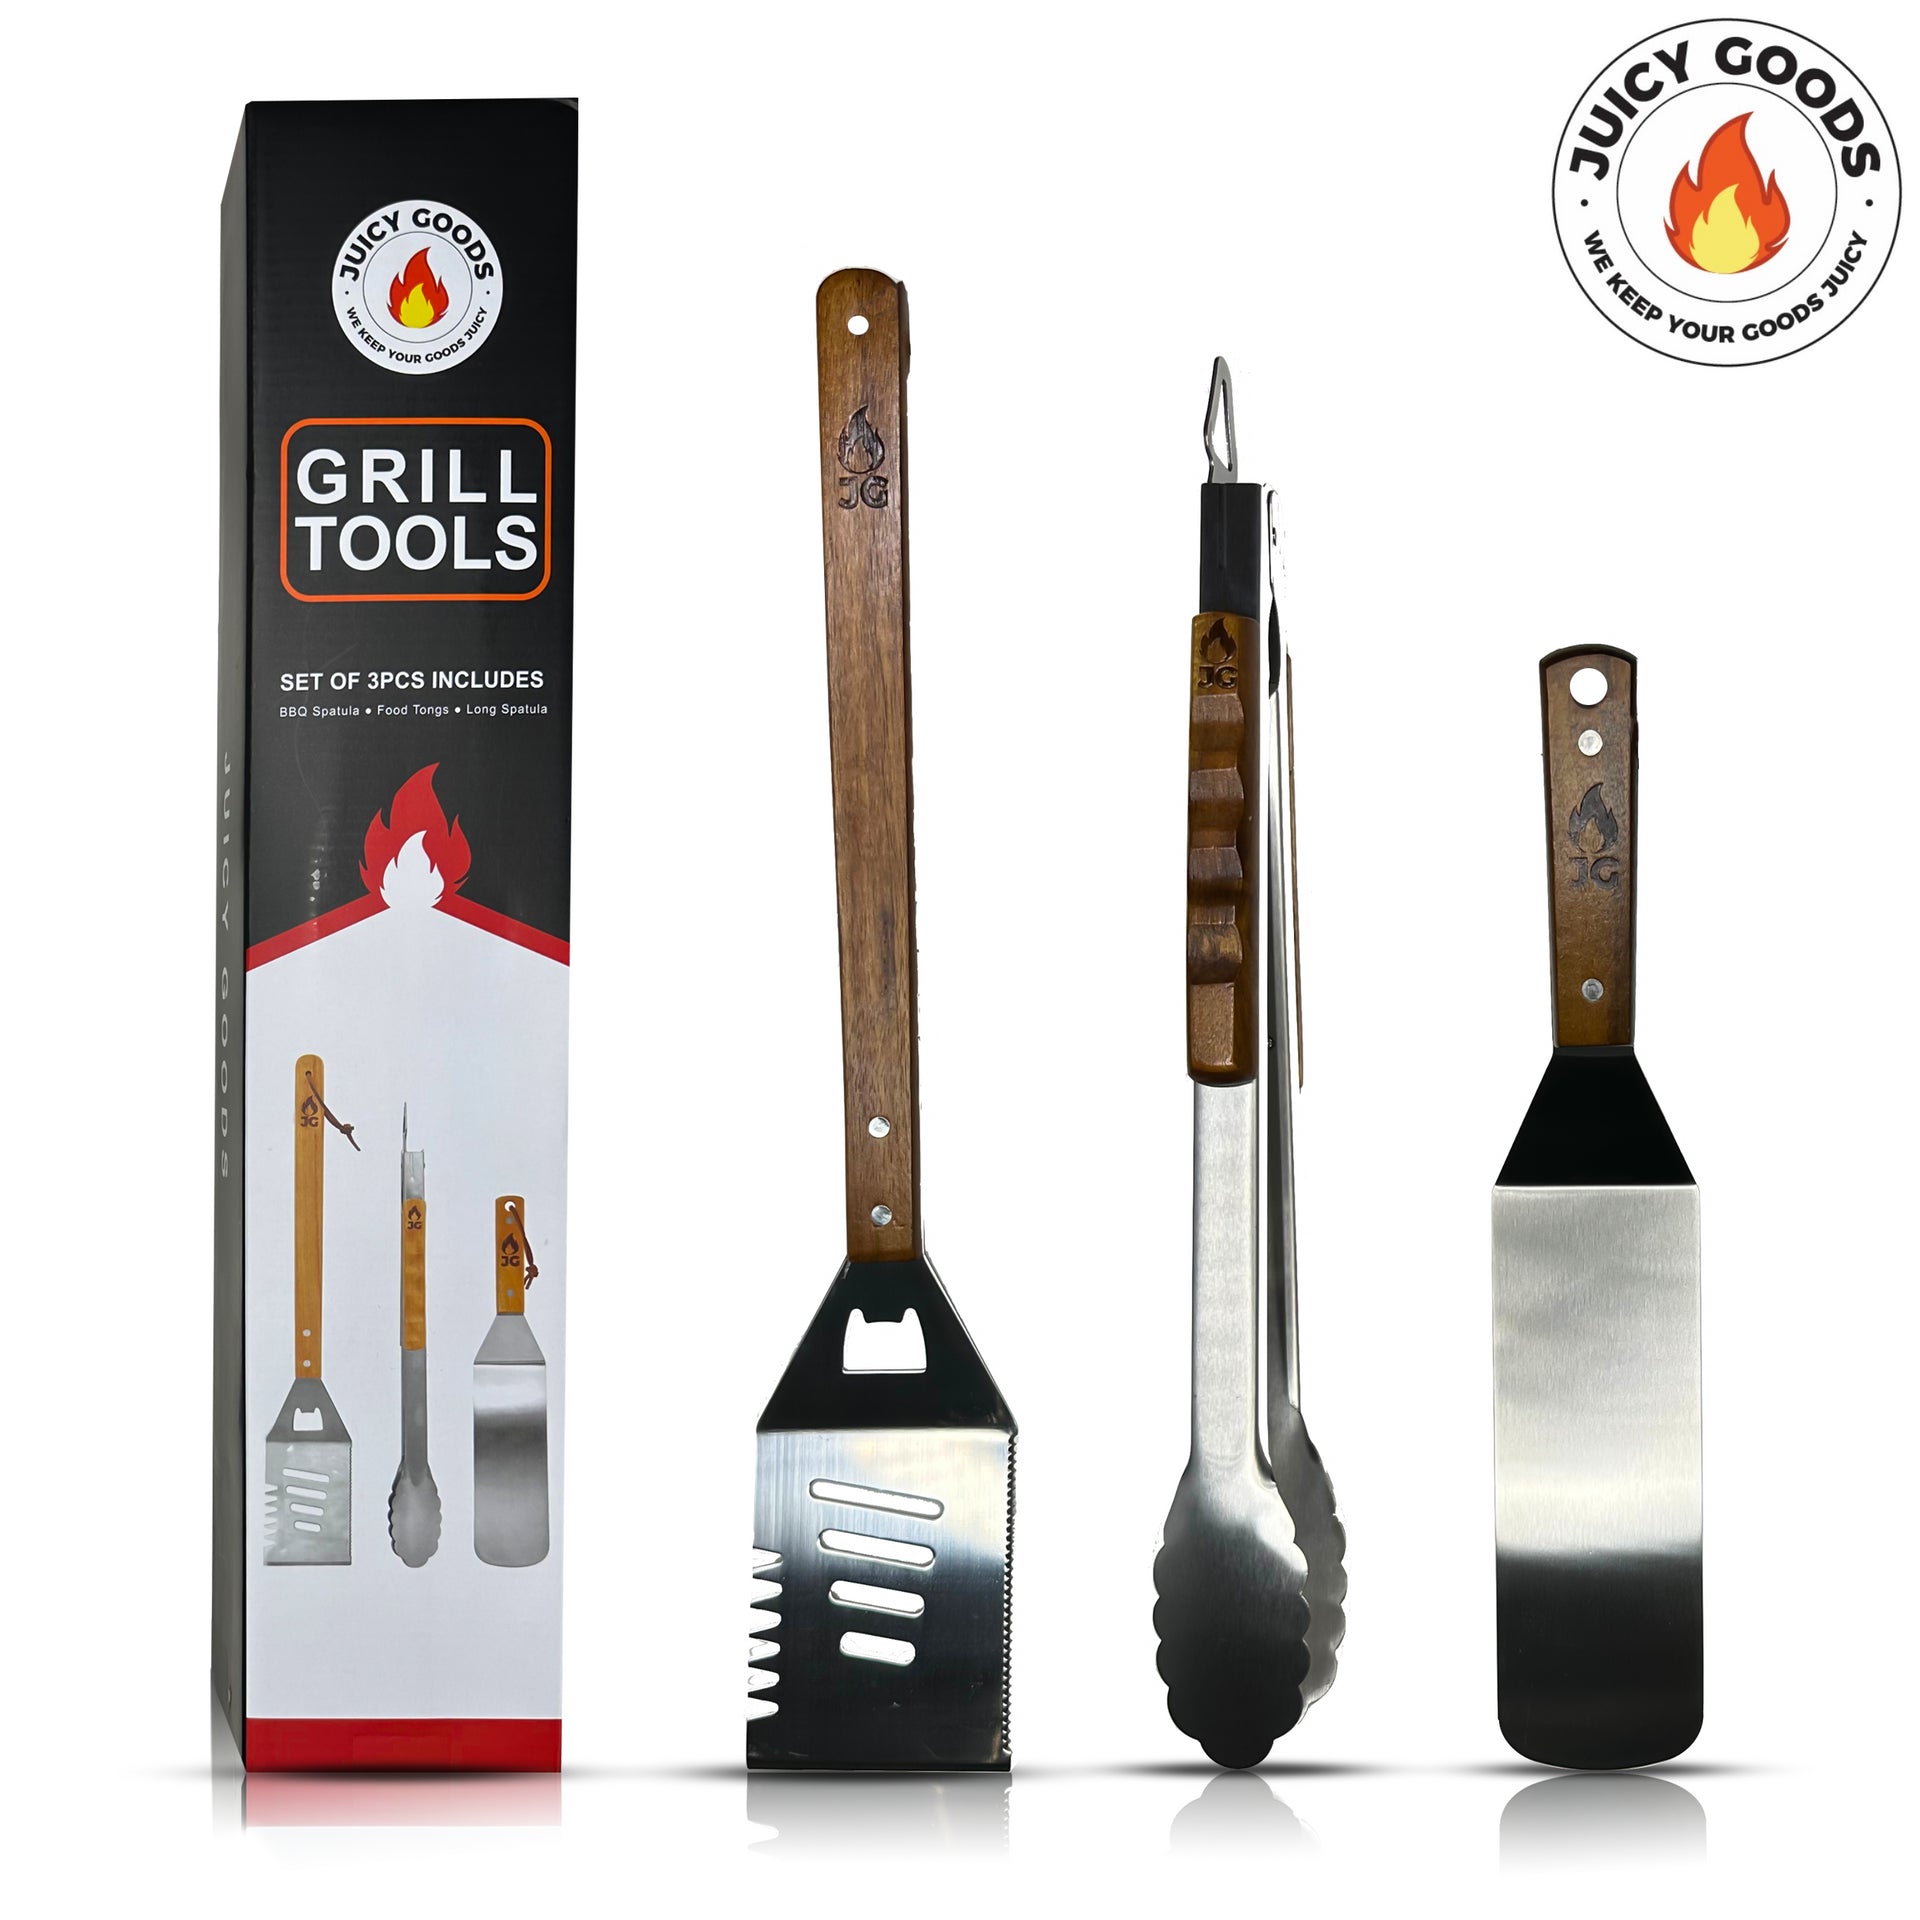 BBQ Grill Set Heavy Duty Tool Set - BBQ Tool Set 3 pc Grill Accessories with Stainless Steel Spatula Tongs and BBQ Spatula and Wood Handles Dark Acacia